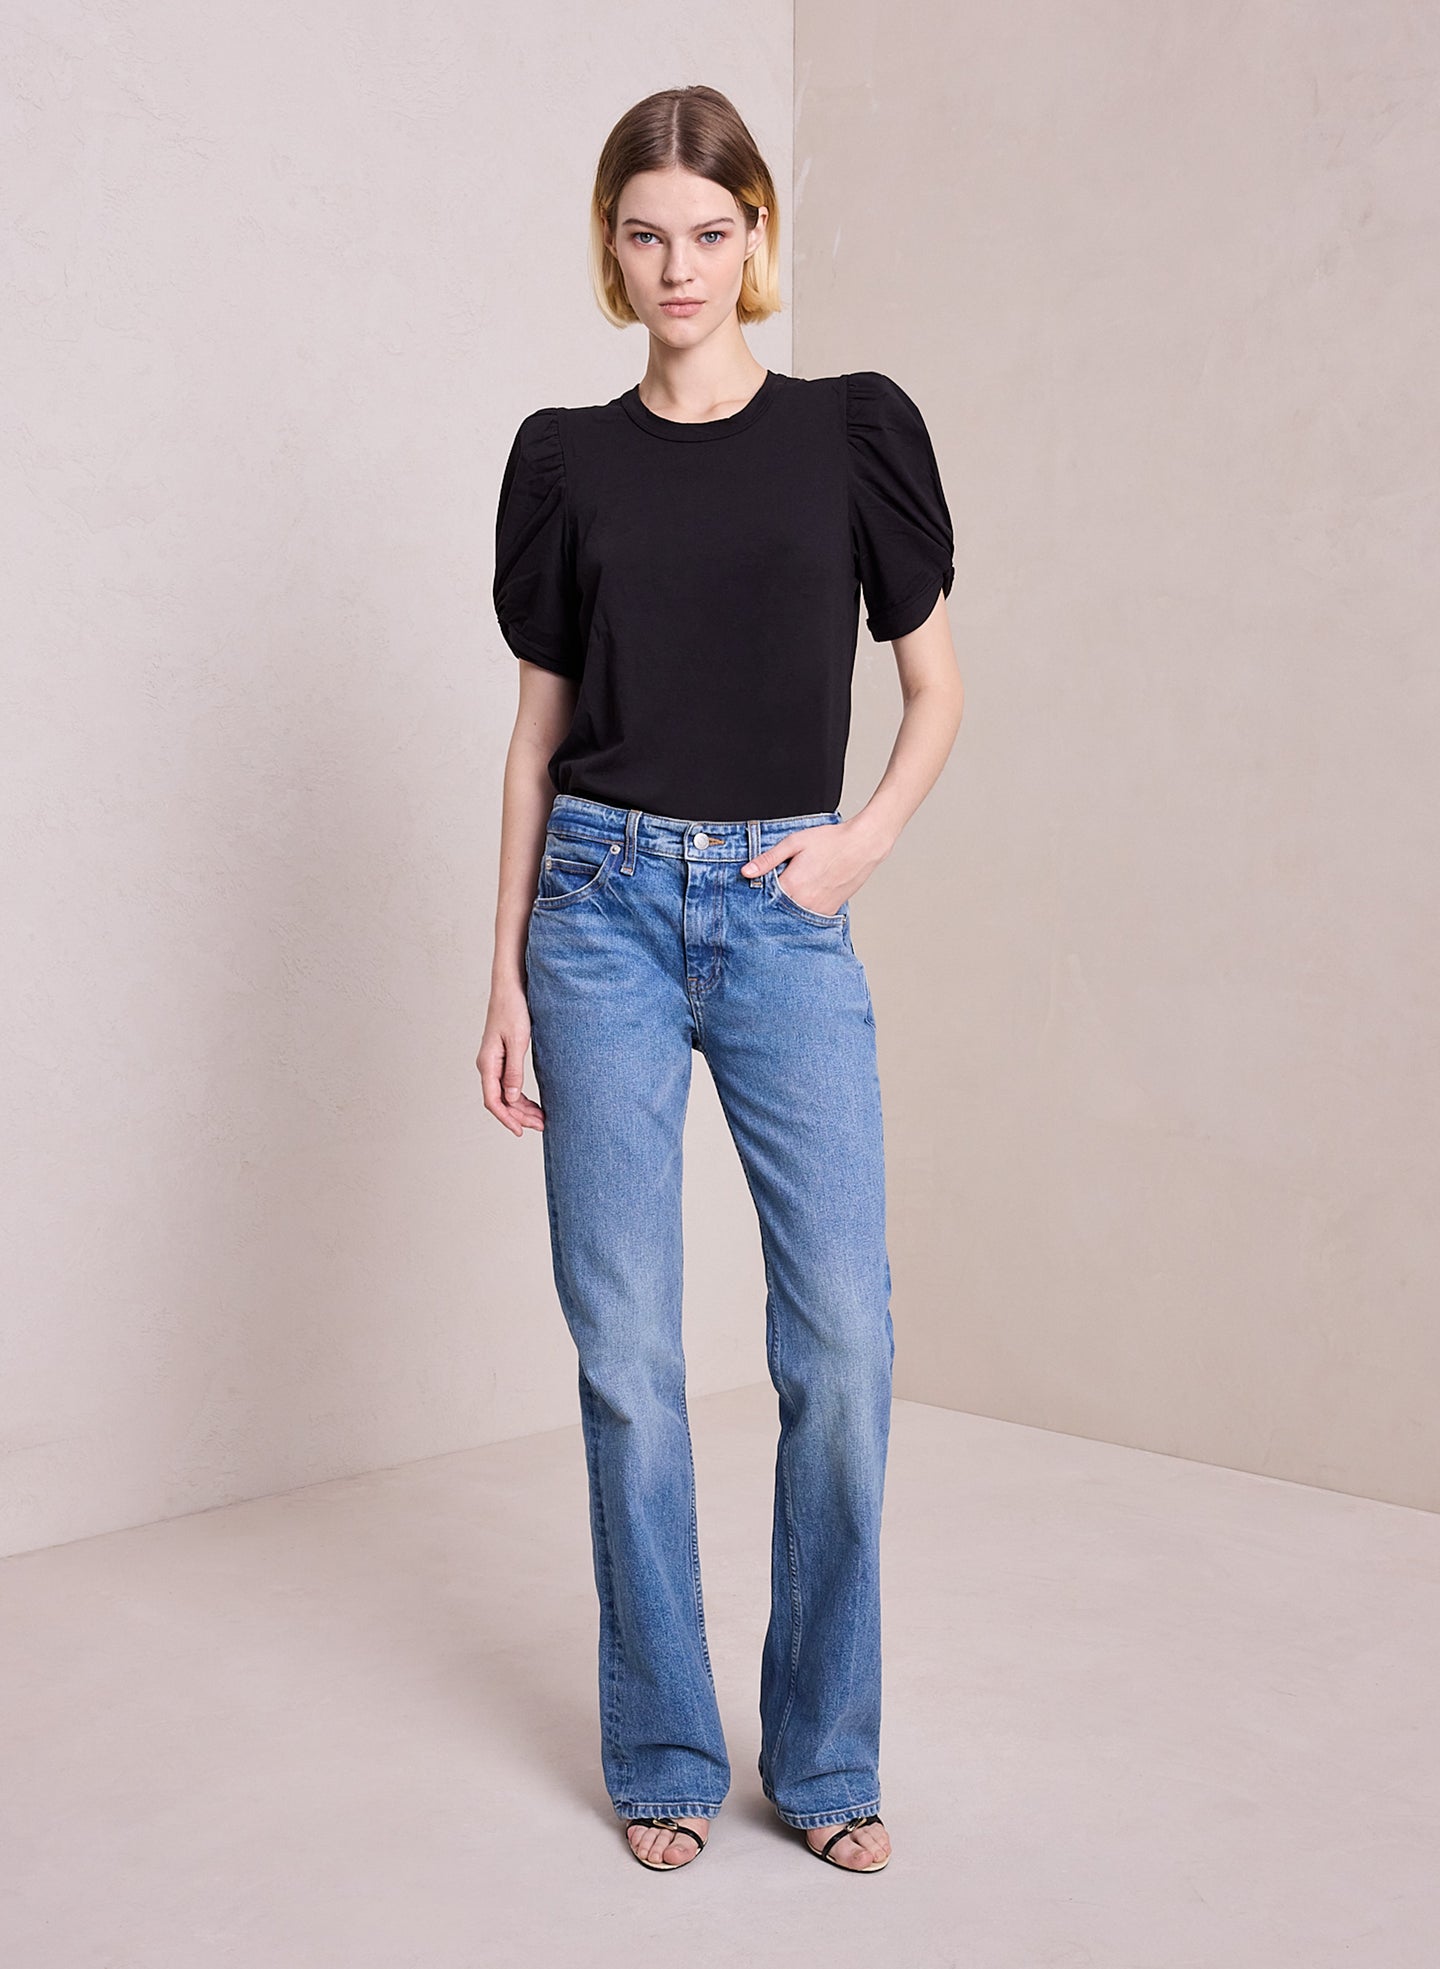 front view of woman wearing black puff sleeve tshirt and light blue wash denim jeans